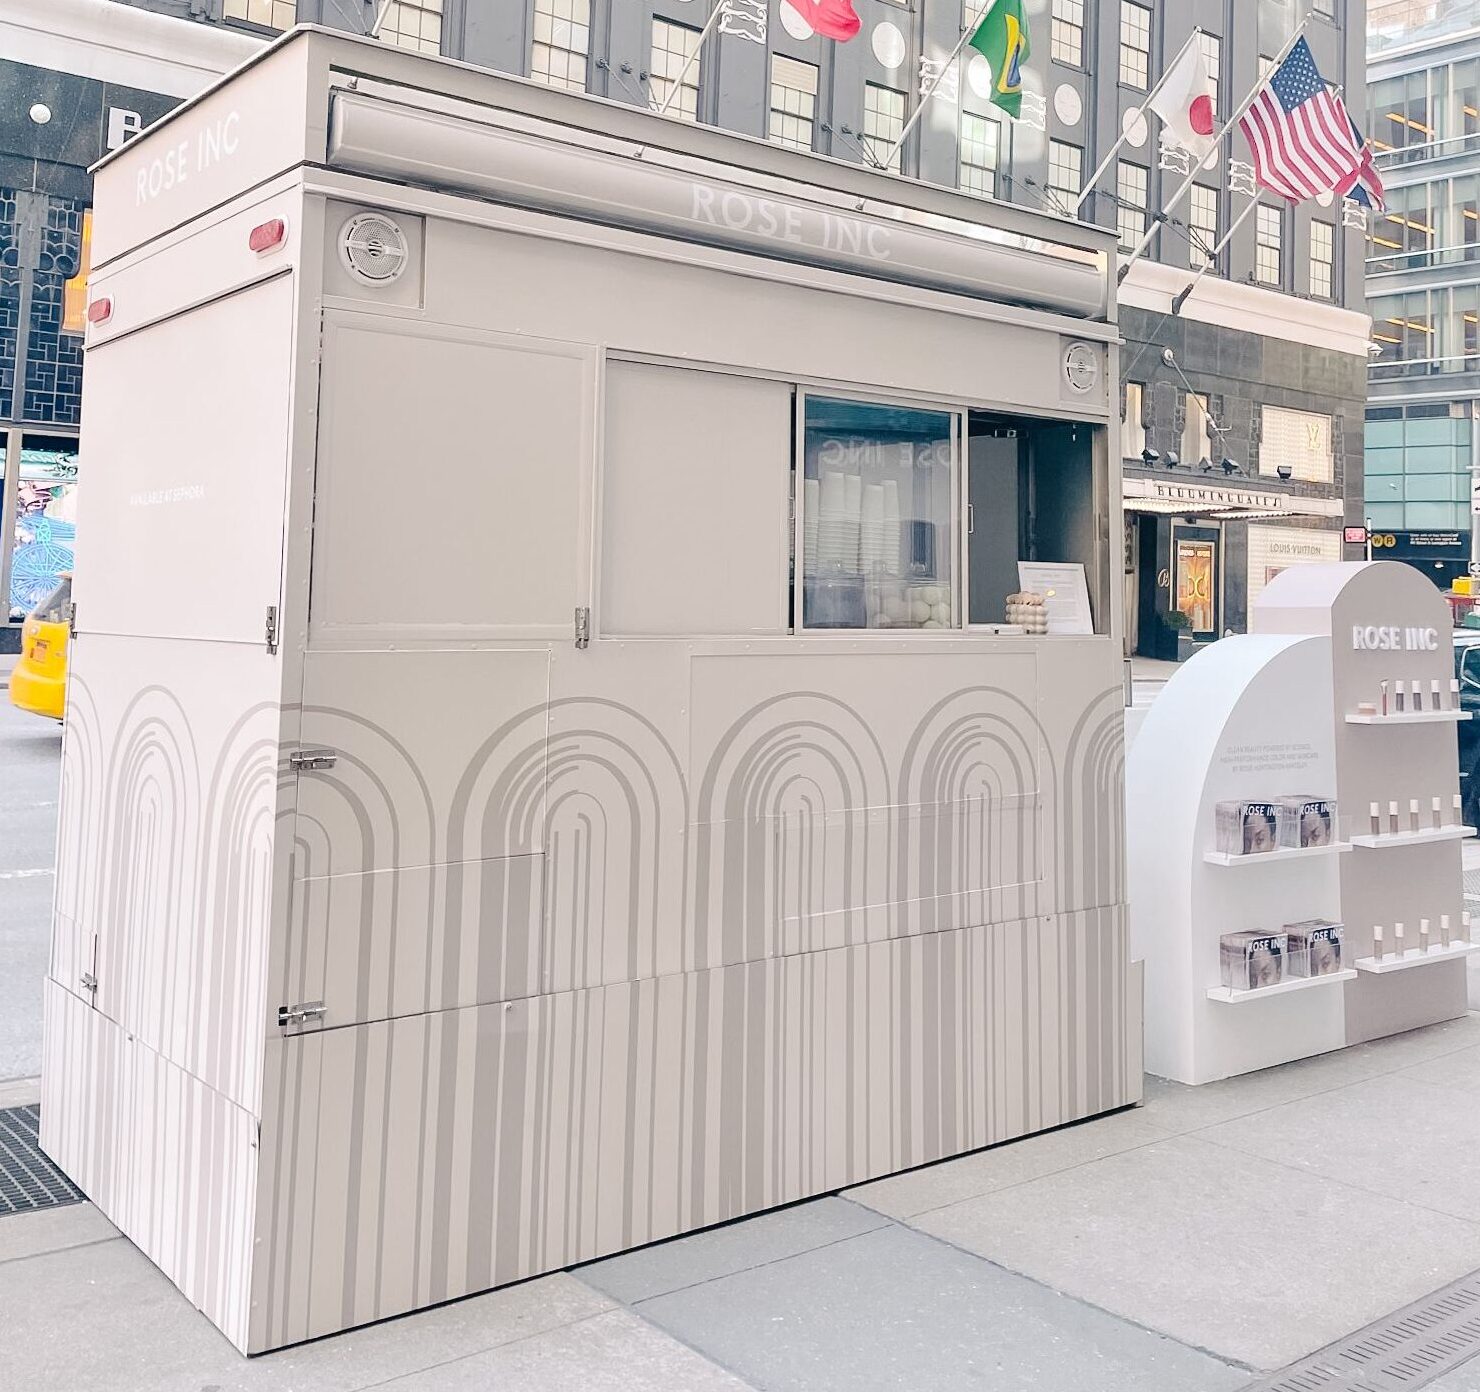 Rose Inc mobile pop-up in NYC